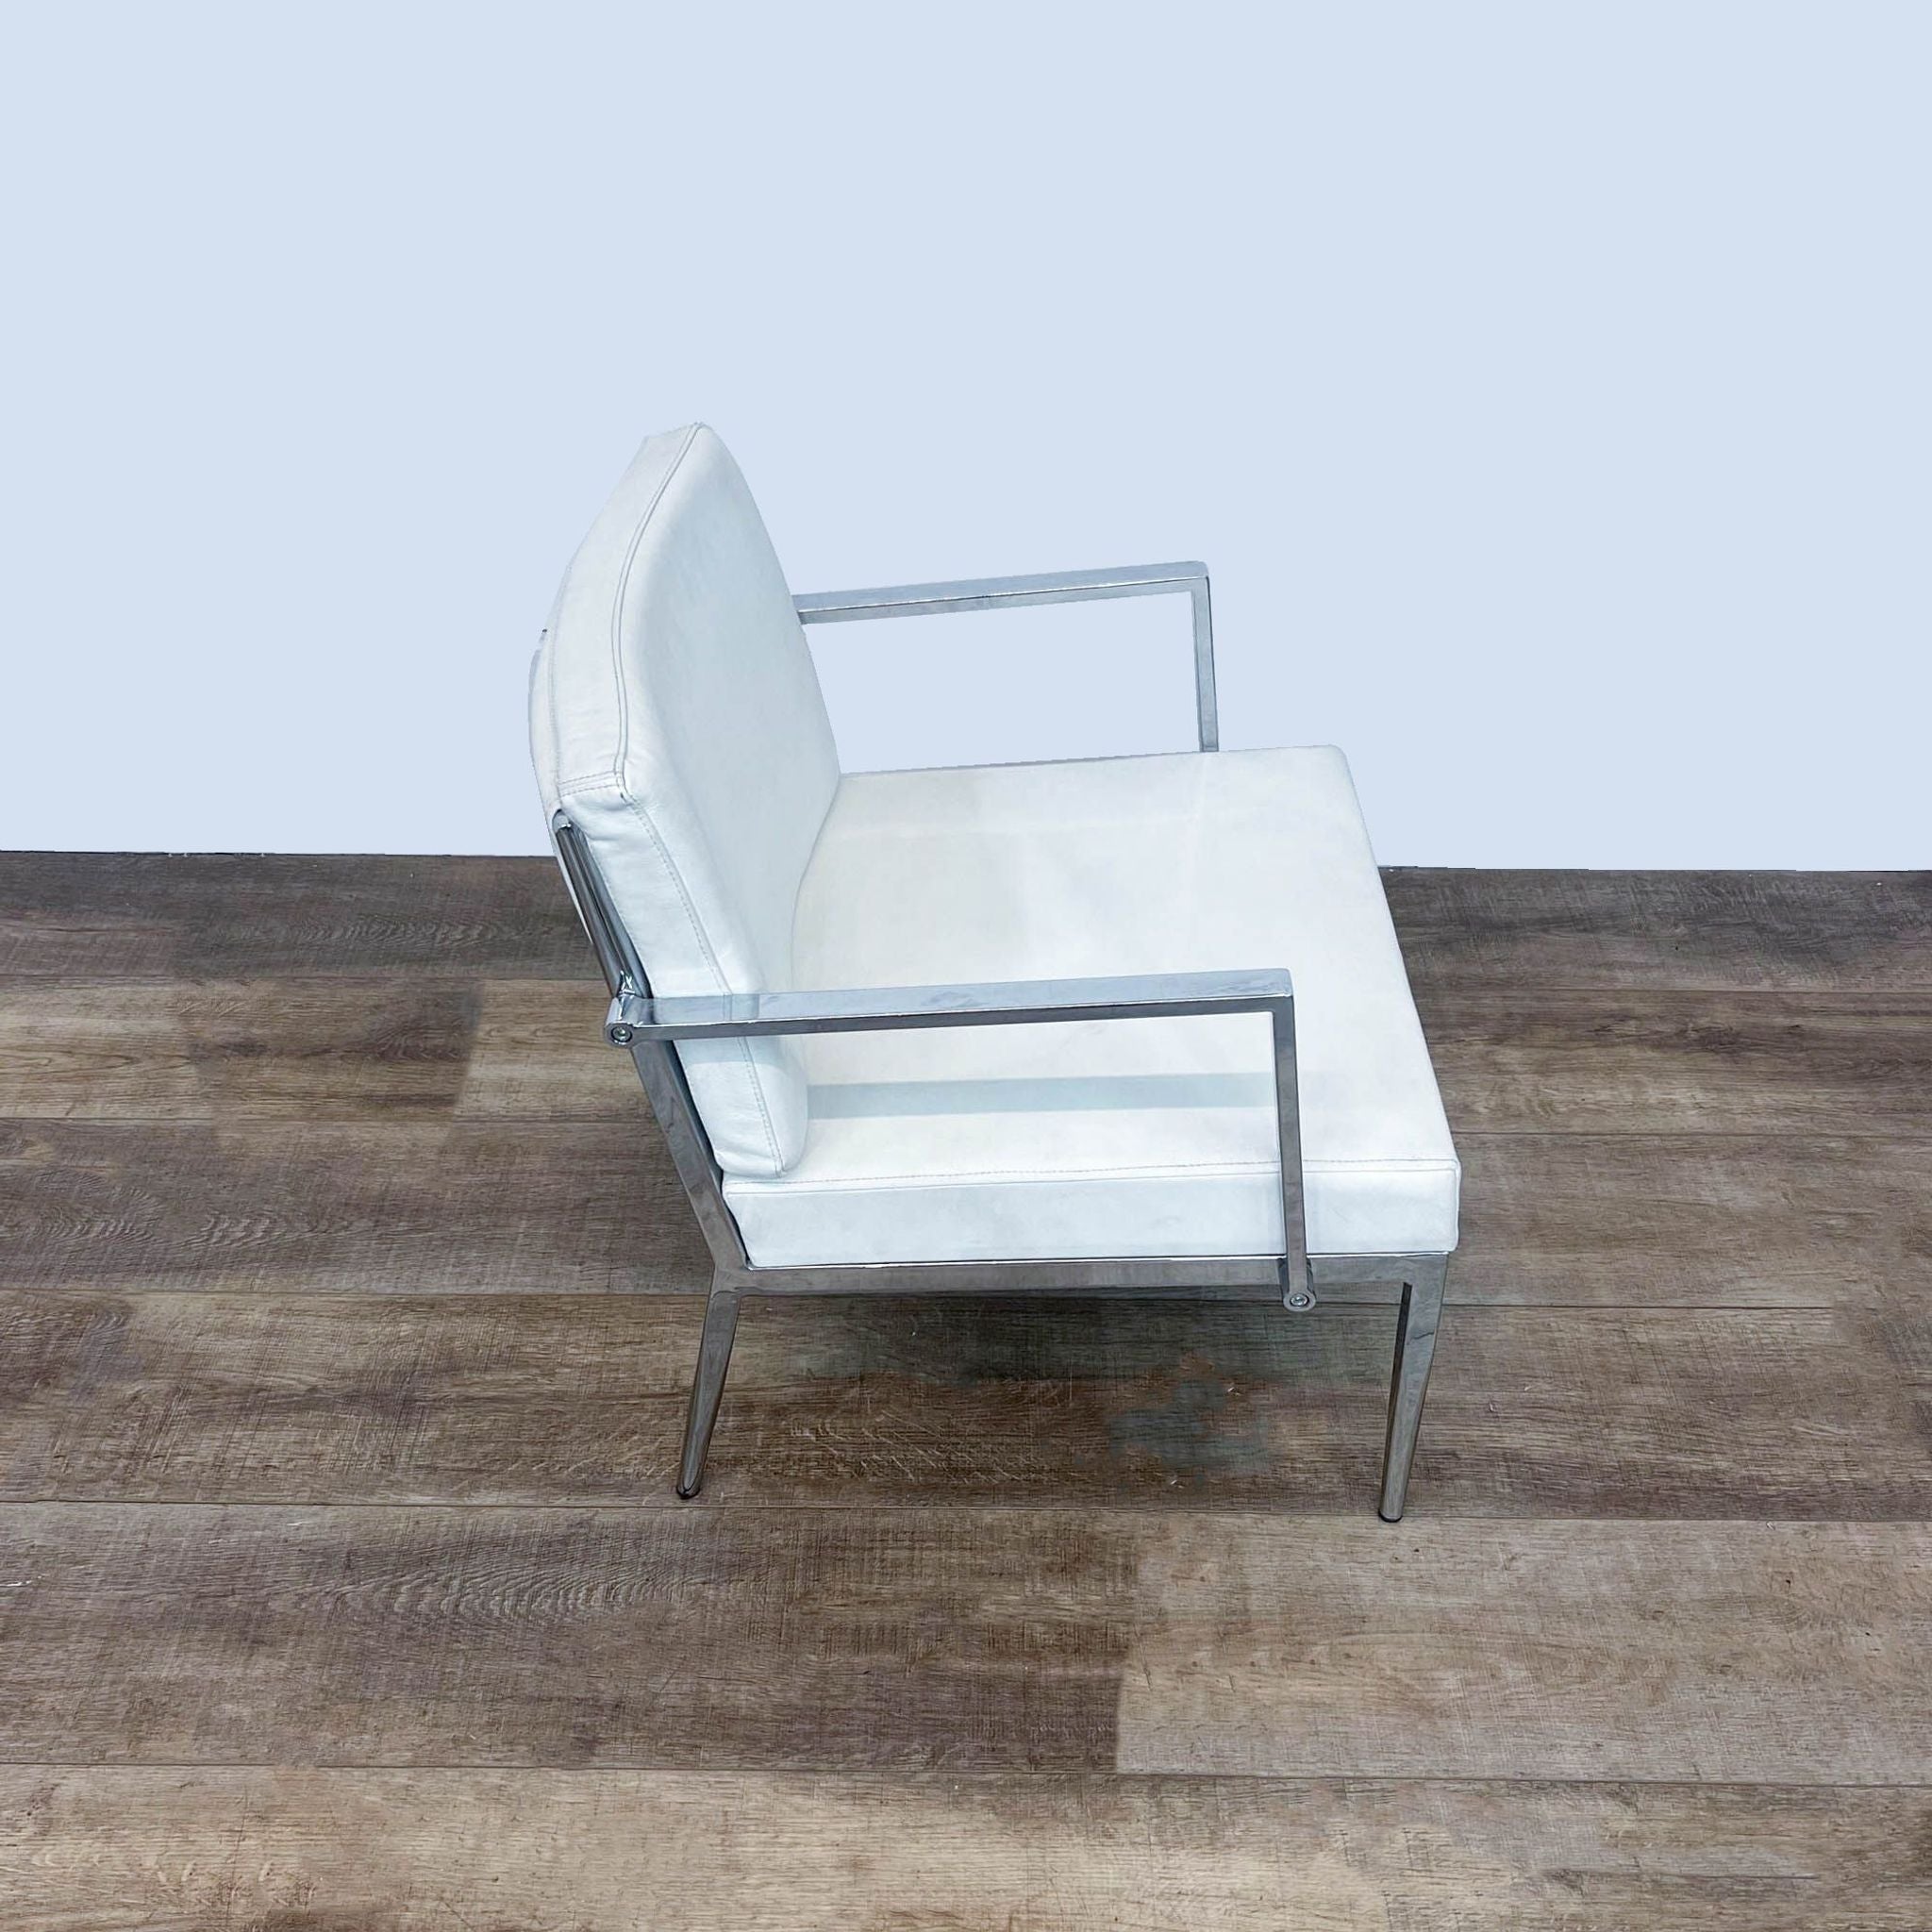 Reperch contemporary white leather lounge chair with chrome frame; angled view showing slight curvature of the backrest.